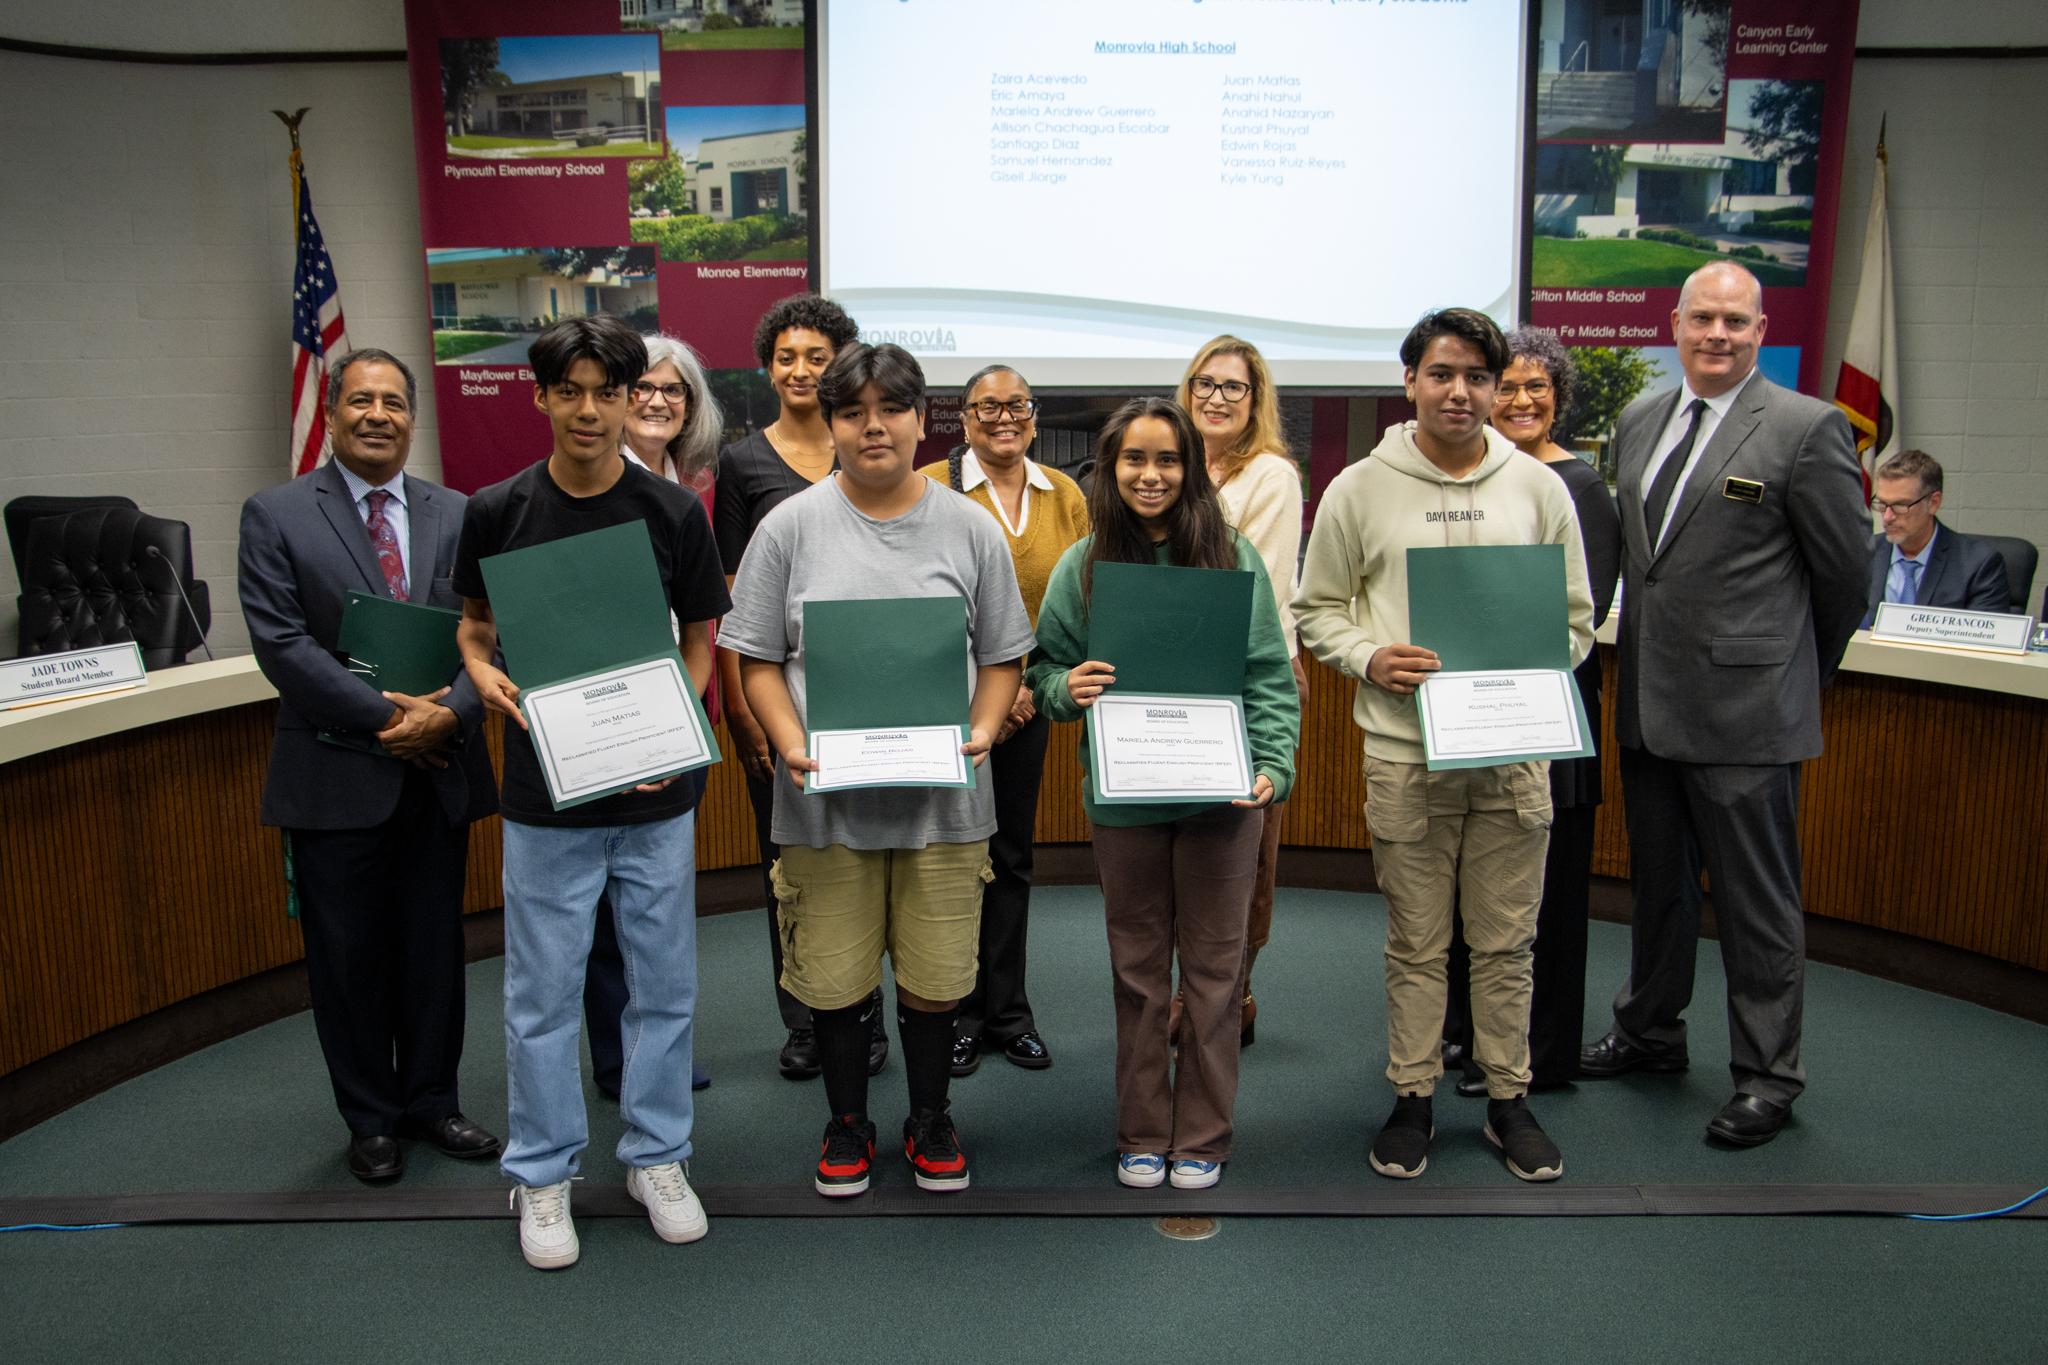 Our students took center stage at the latest board meeting as we celebrated their incredible milestone: reclassification from English learner (EL) status to Fluent English Proficient (RFEP) status.